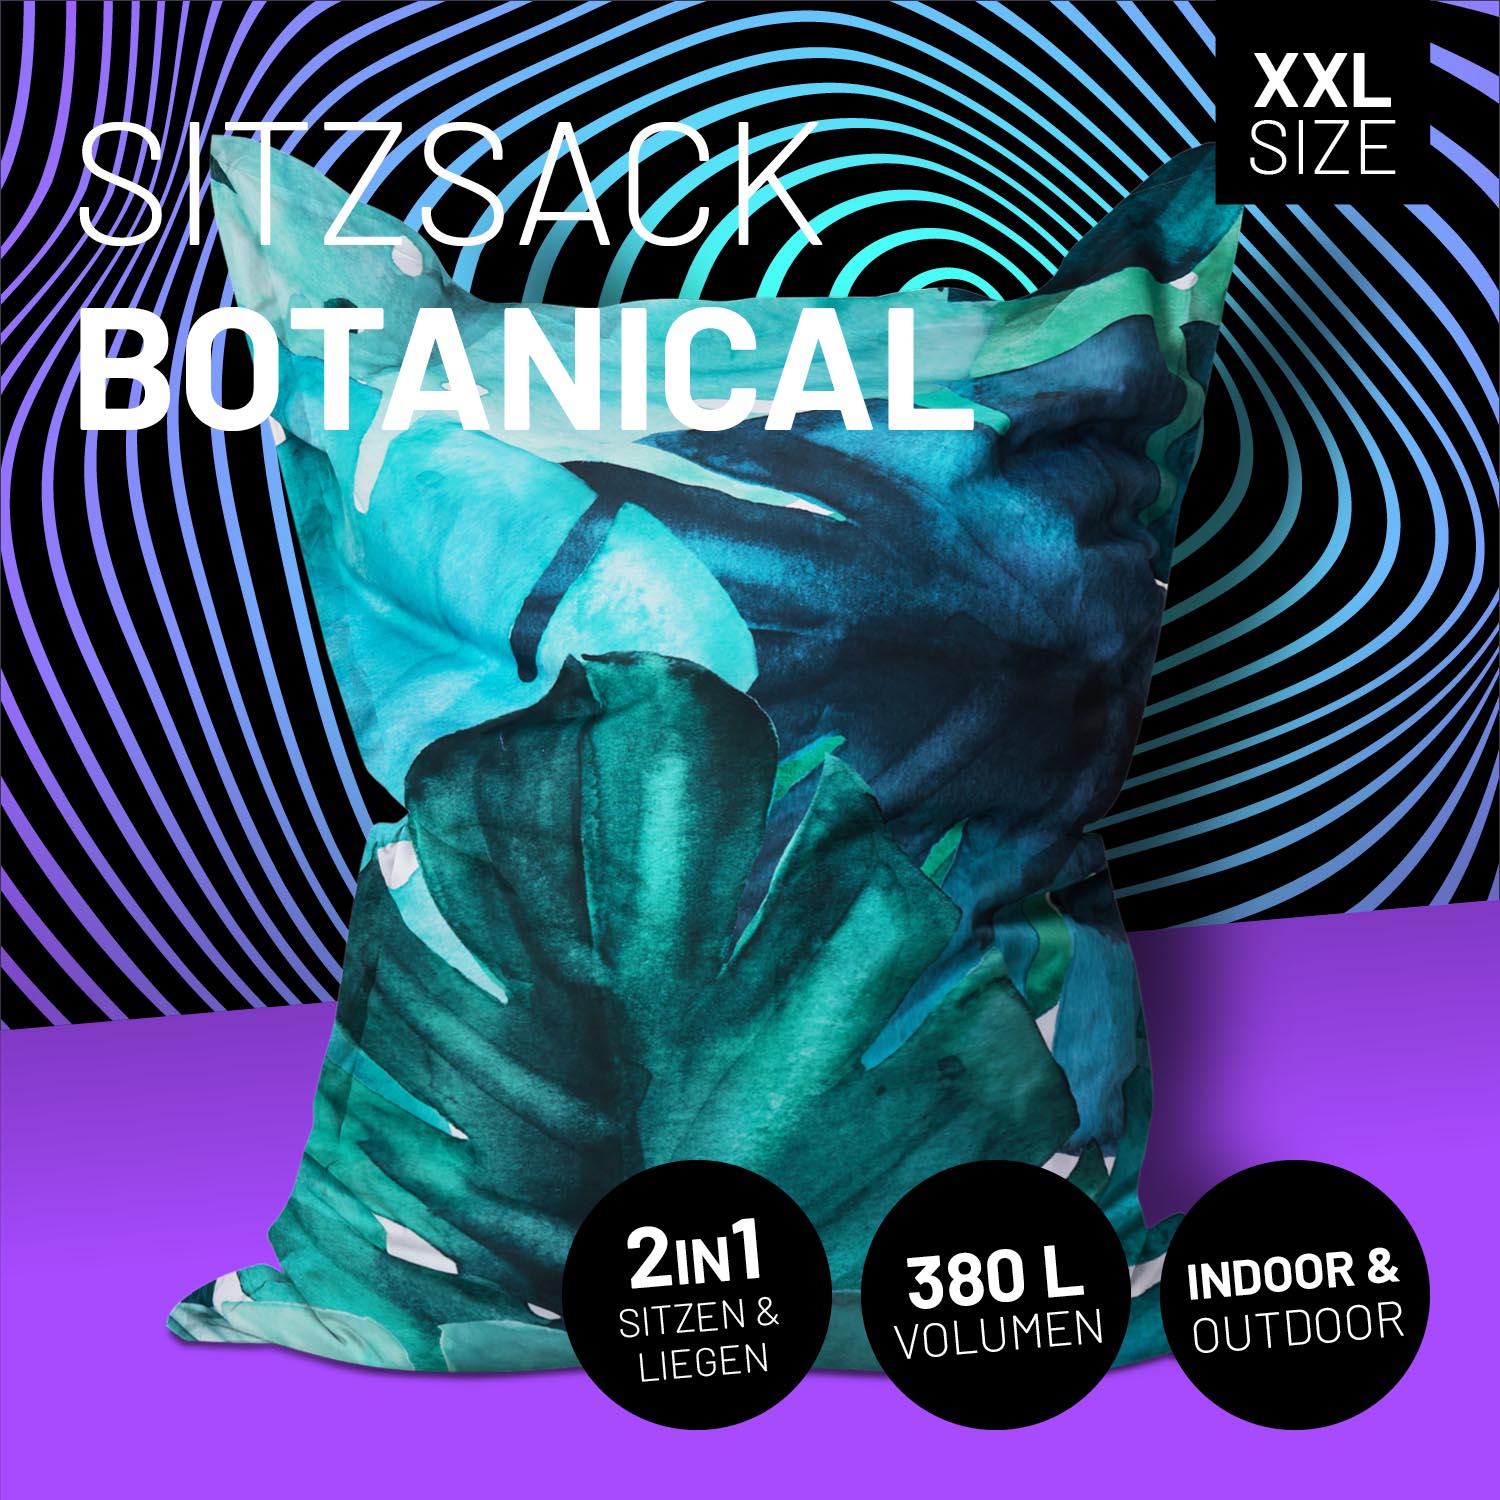 Sitzsack Classic XXL (380 L) - In- & outdoor - Special Edition Botanical